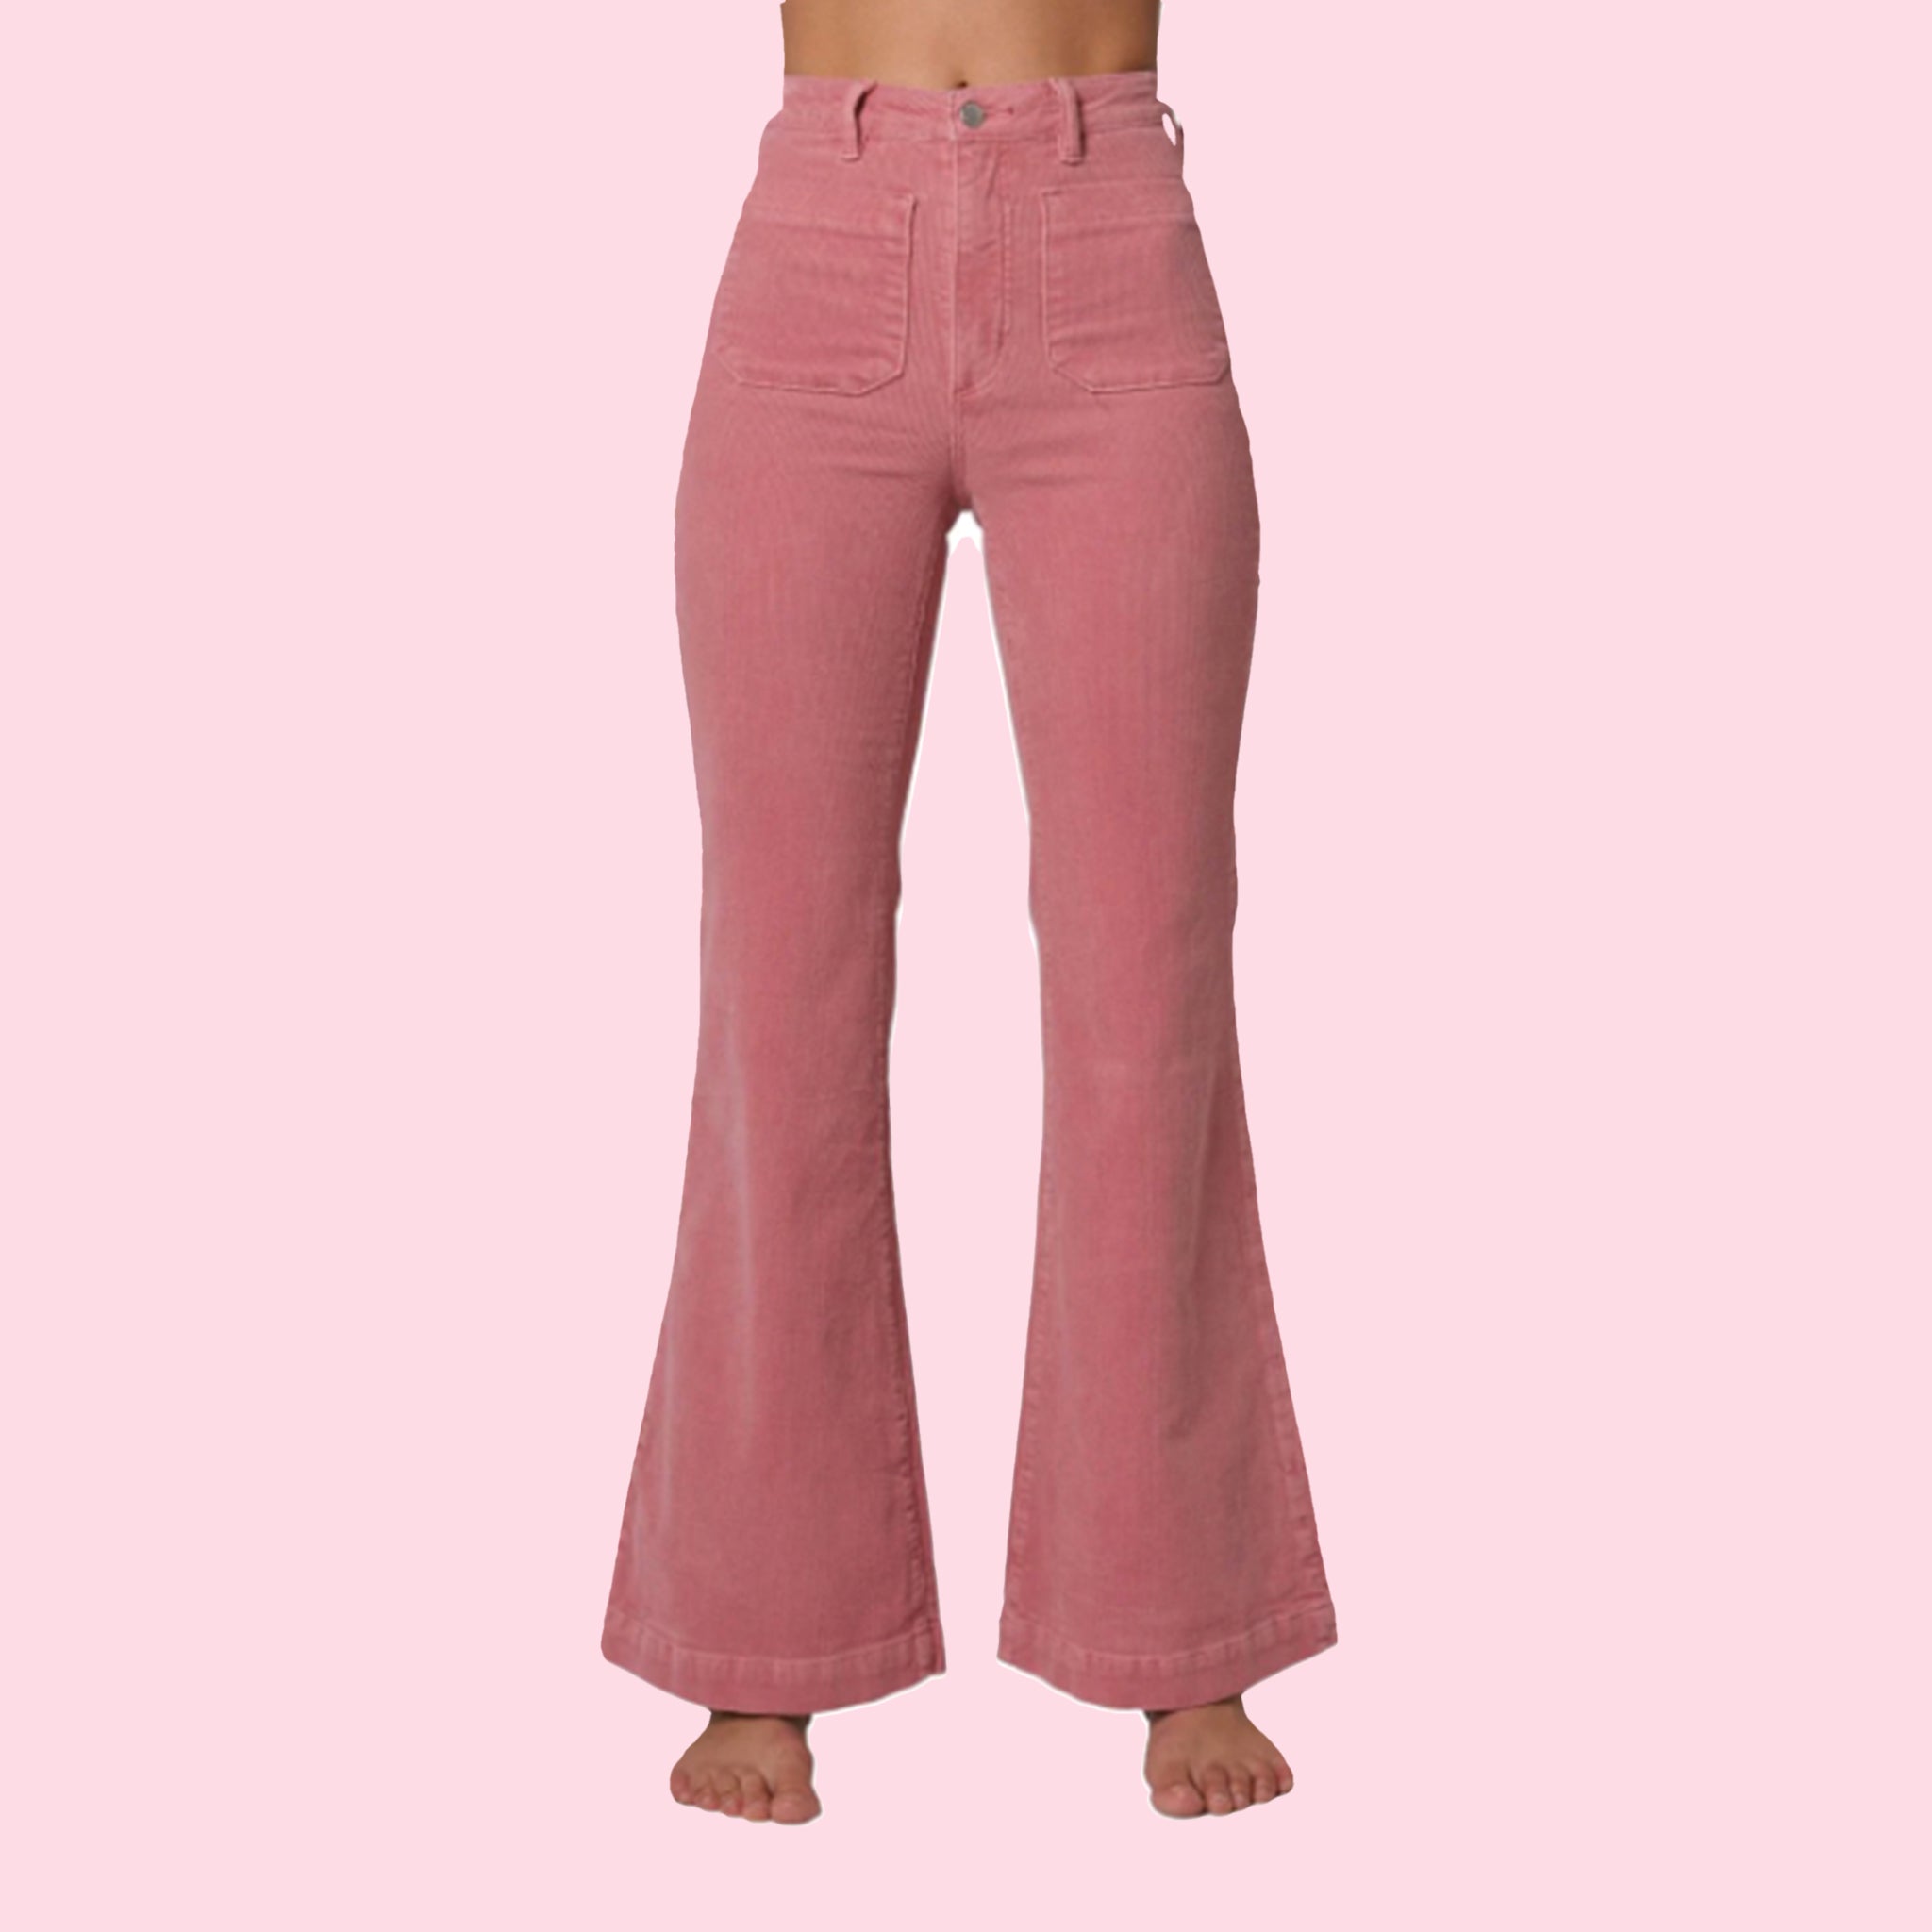 On a pink background is a model wearing the pink corduroy pants with front pockets and a flare bottom. 